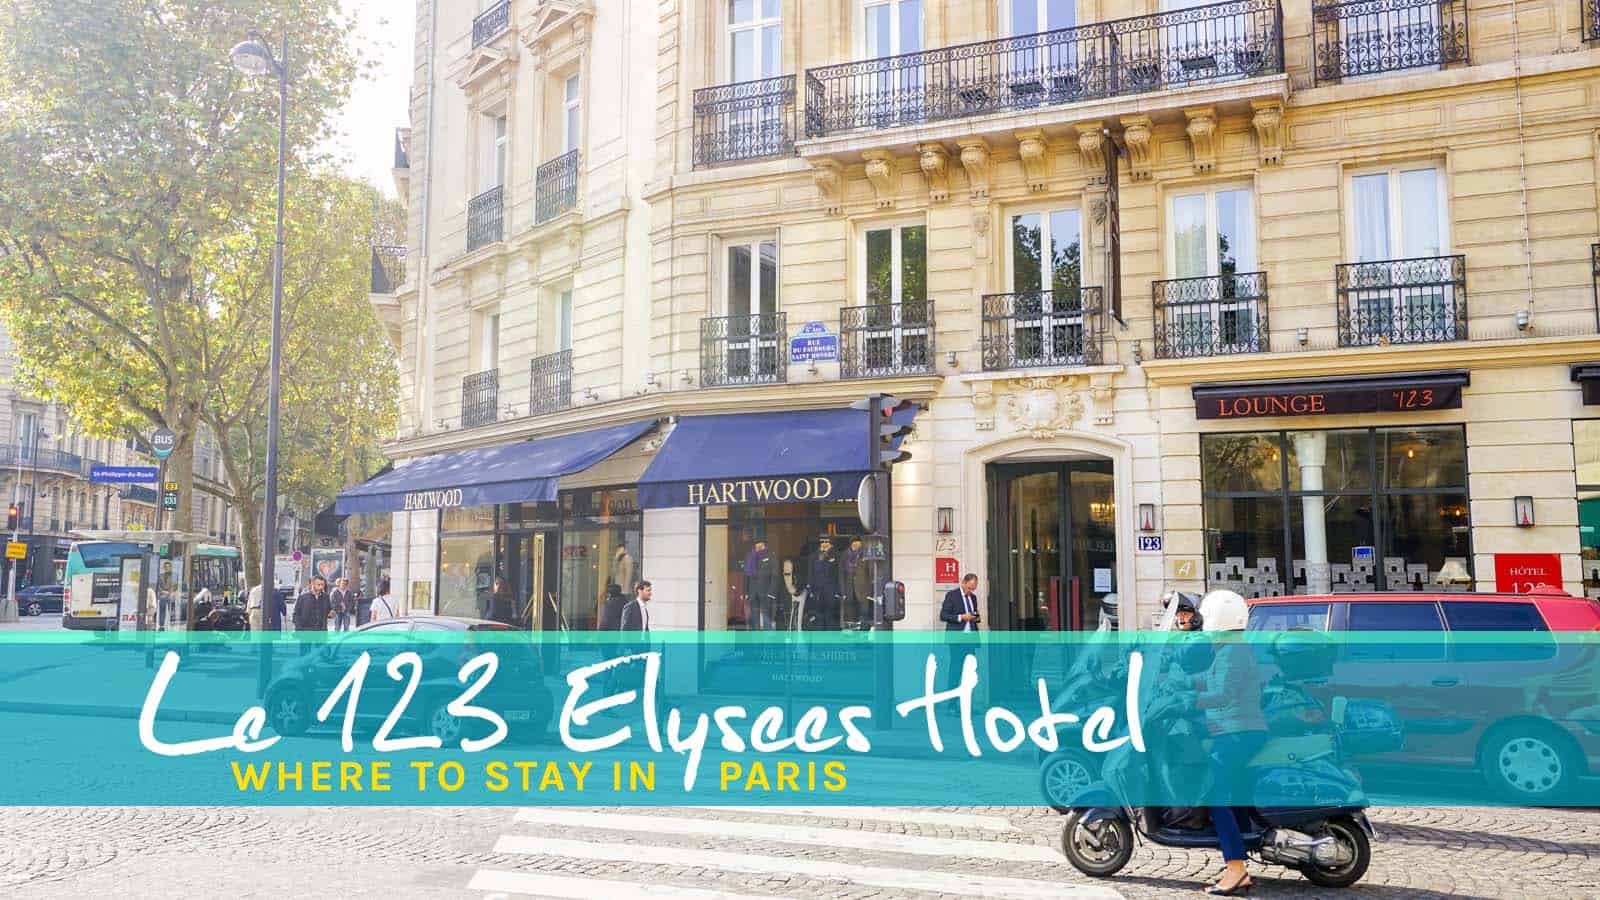 5 Reasons to Stay at Le 123 Elysees Hotel on Your Next Trip to Paris